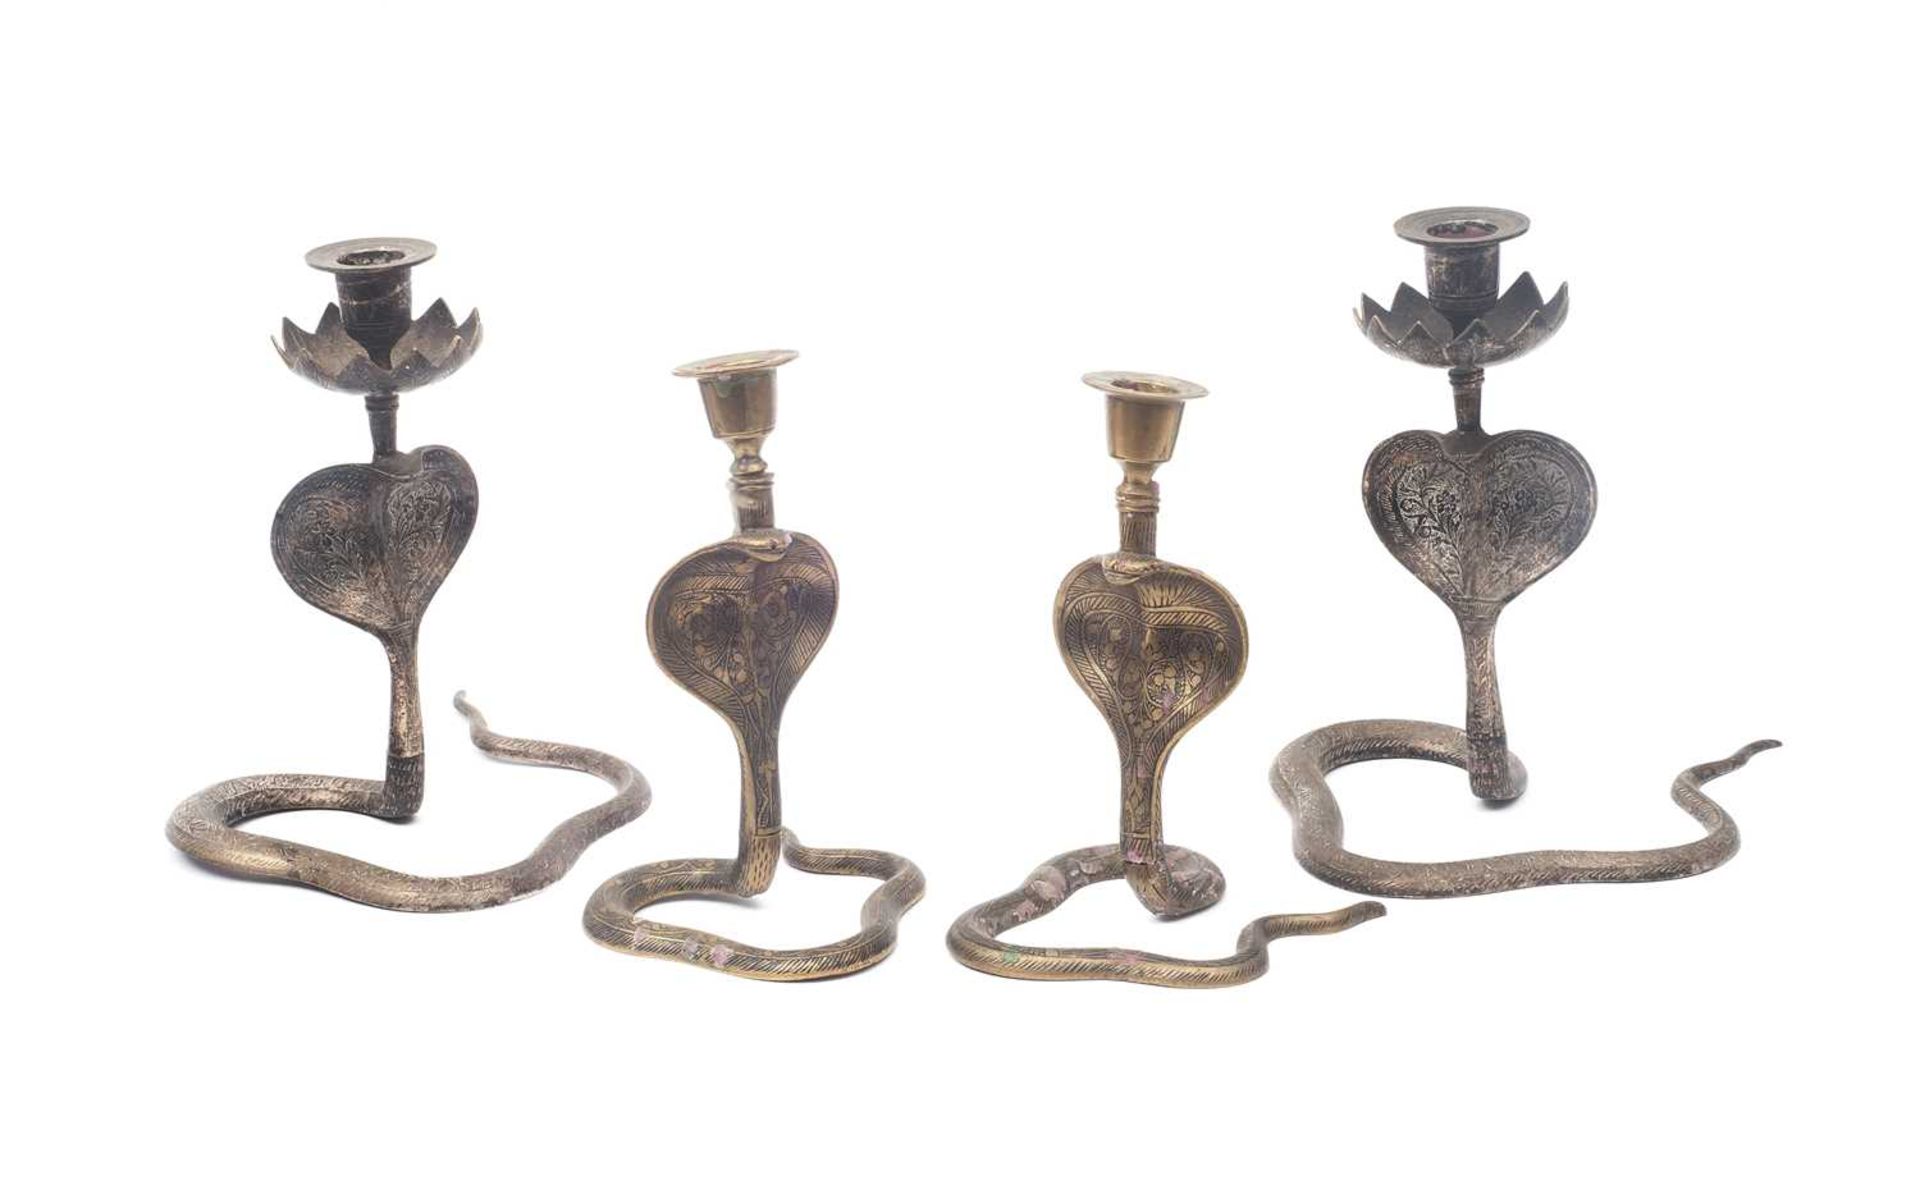 TWO PAIRS OF 19TH / EARLY 20TH CENTURY INDIAN COBRA CANDLESTICKS - Image 2 of 2